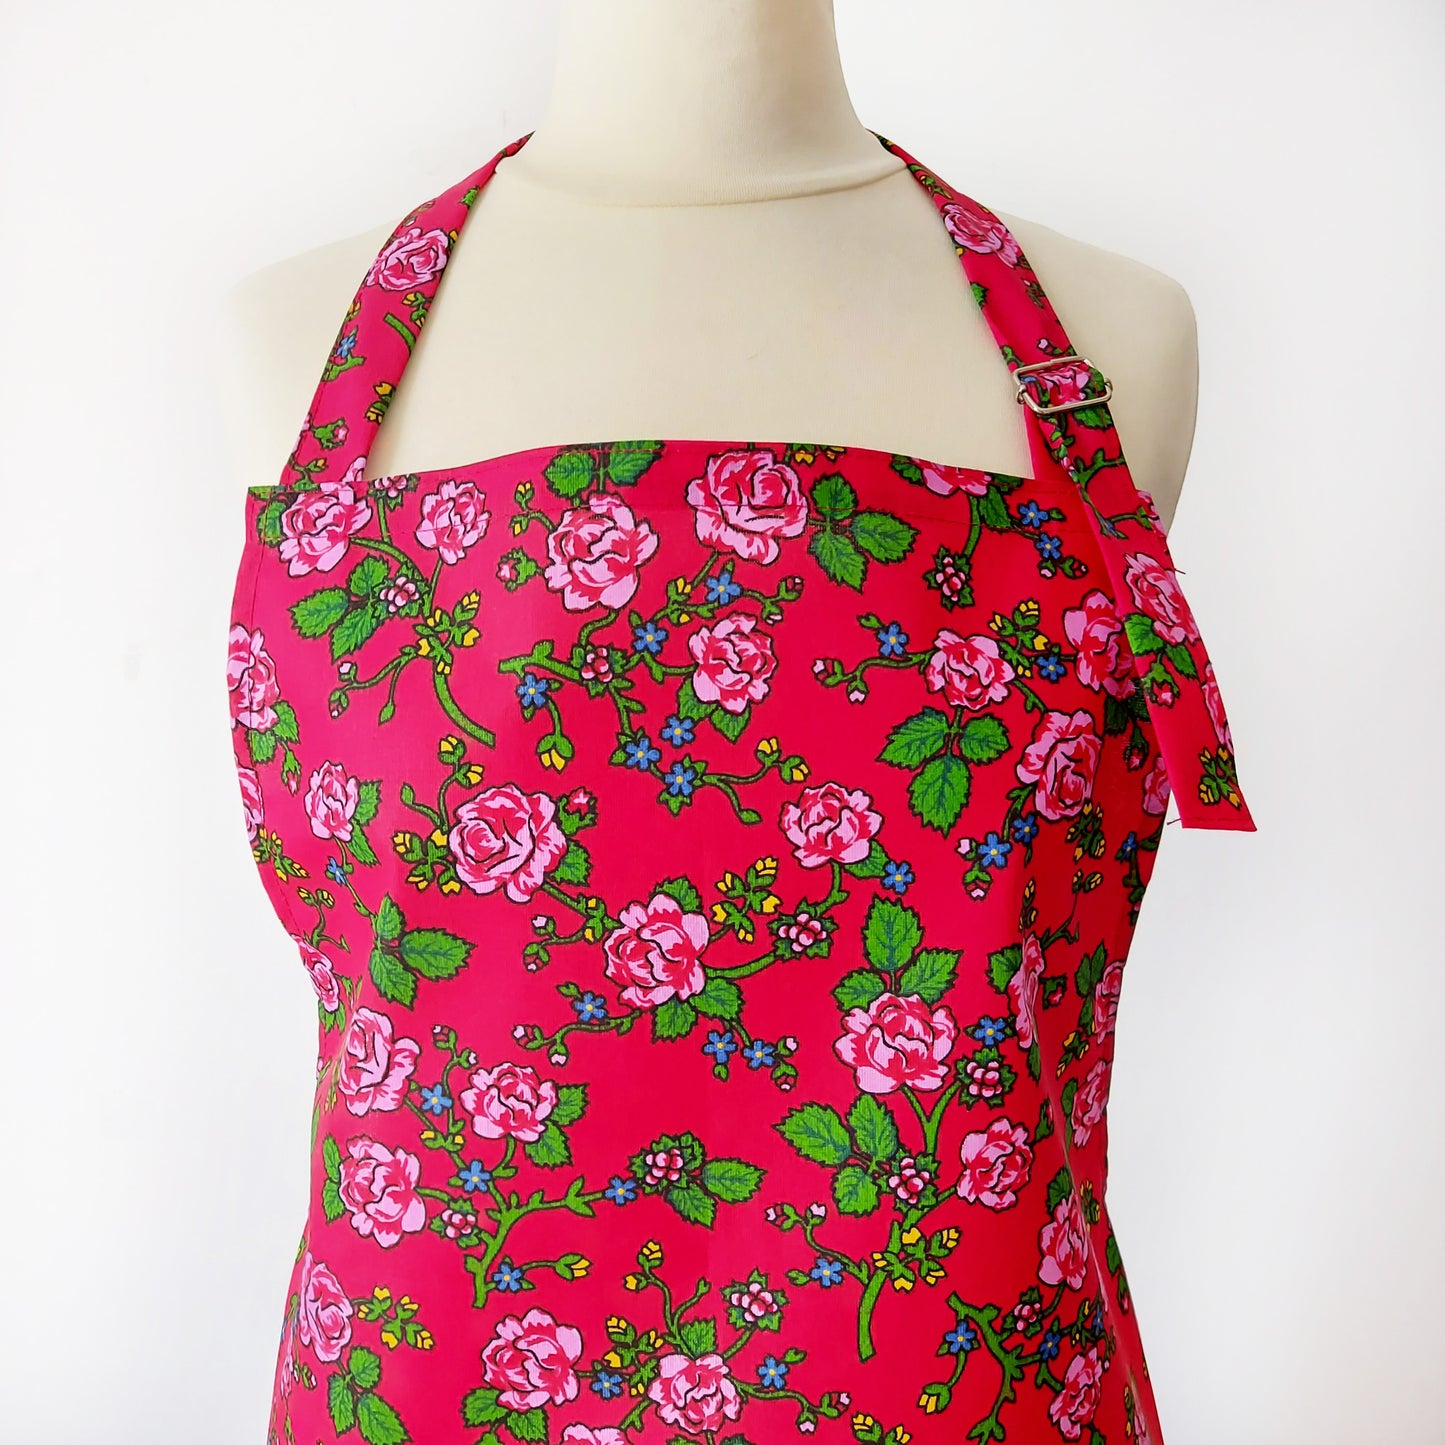 Cotton aprons, red aprons, buy kitchen aprons, aprons in flowers, aprons bulk, 100% cotton apron, apron with pocket, women's aprons, aprons for cooking, Linencharm